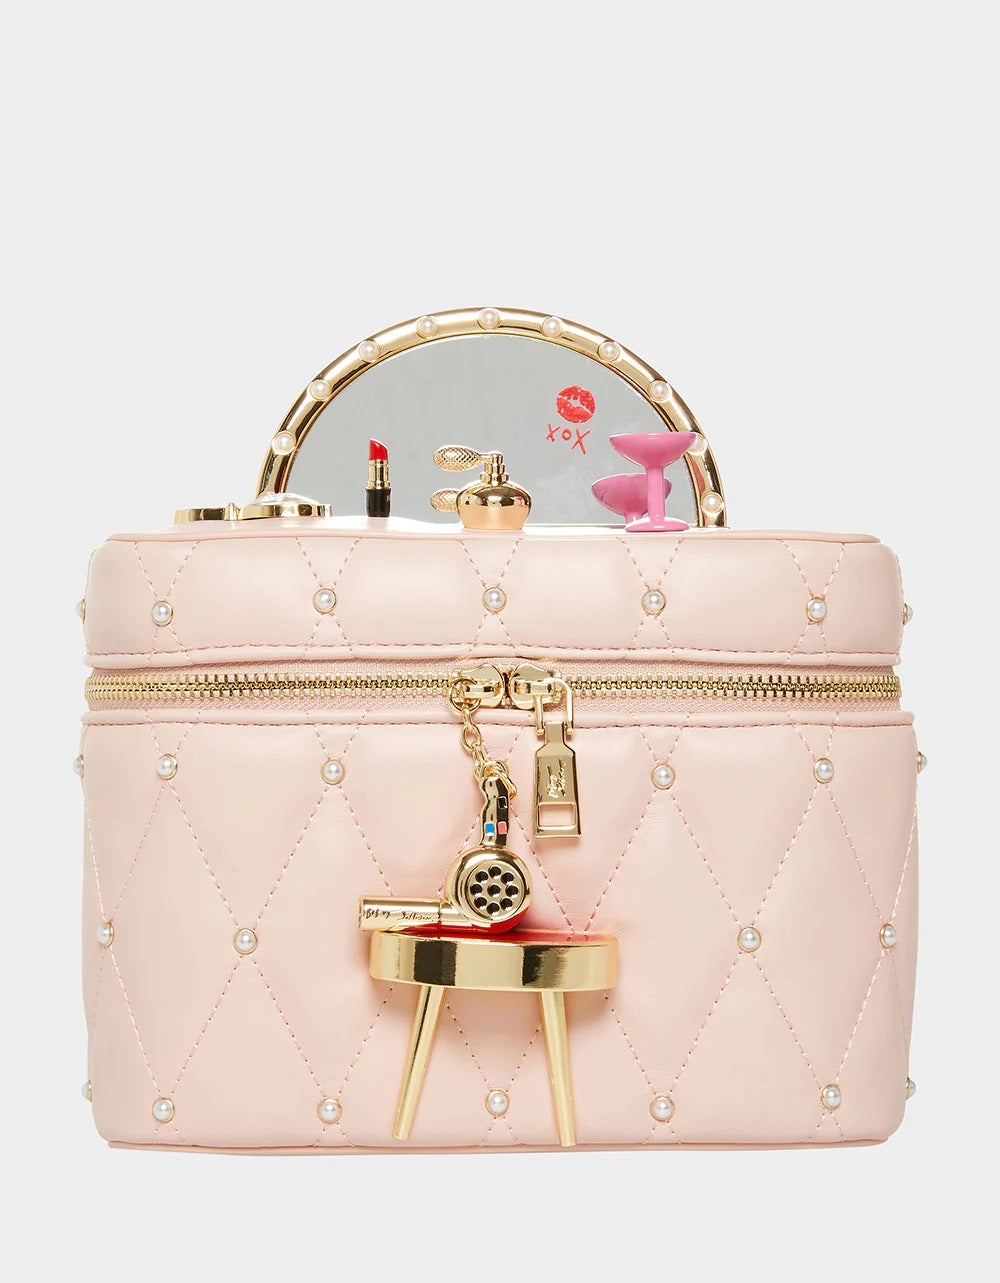 All Handbags  Crossbodies, Shoulder Bags, Clutches, Totes, Satchels &  Kitsch – Betsey Johnson